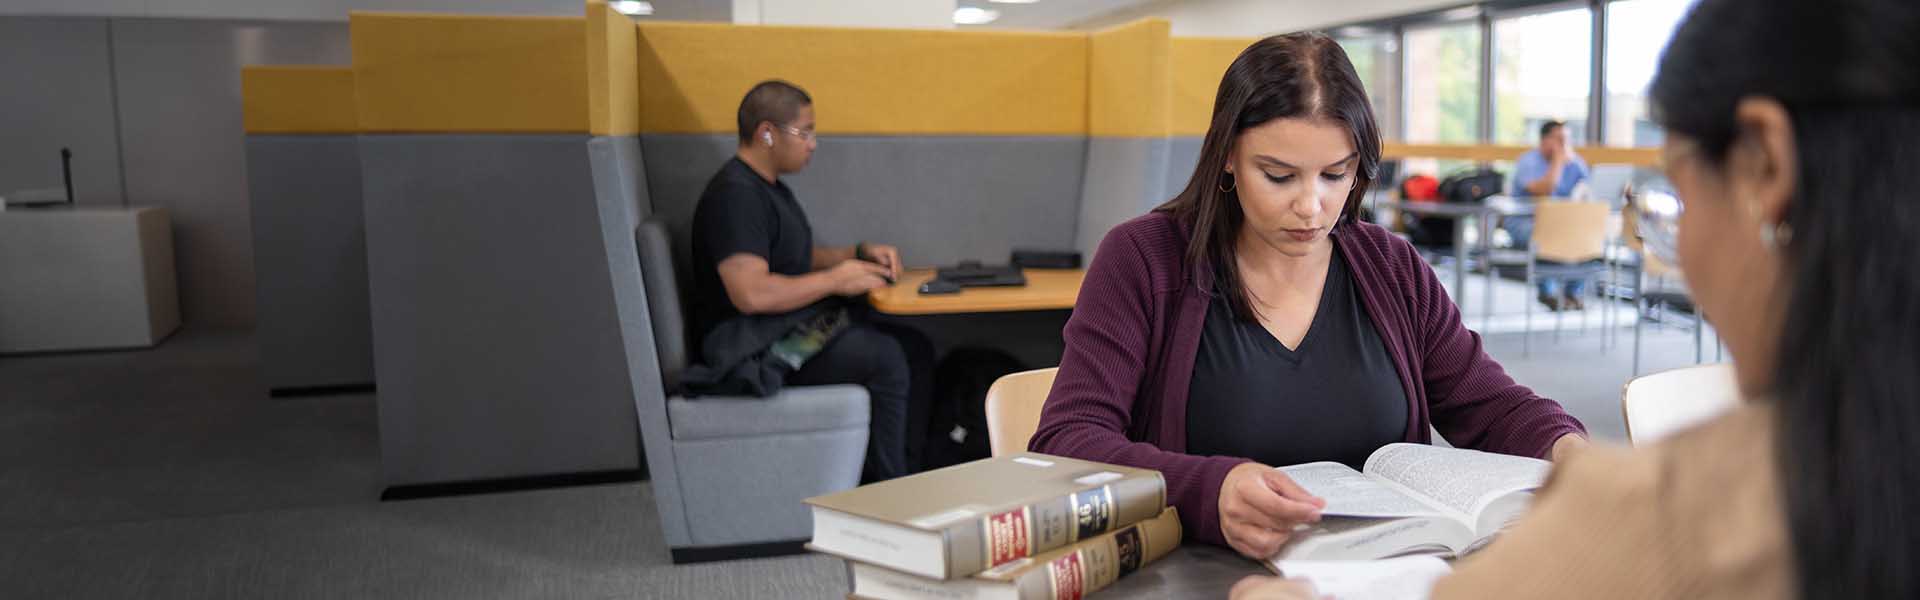 Legal studies students reading law books in library